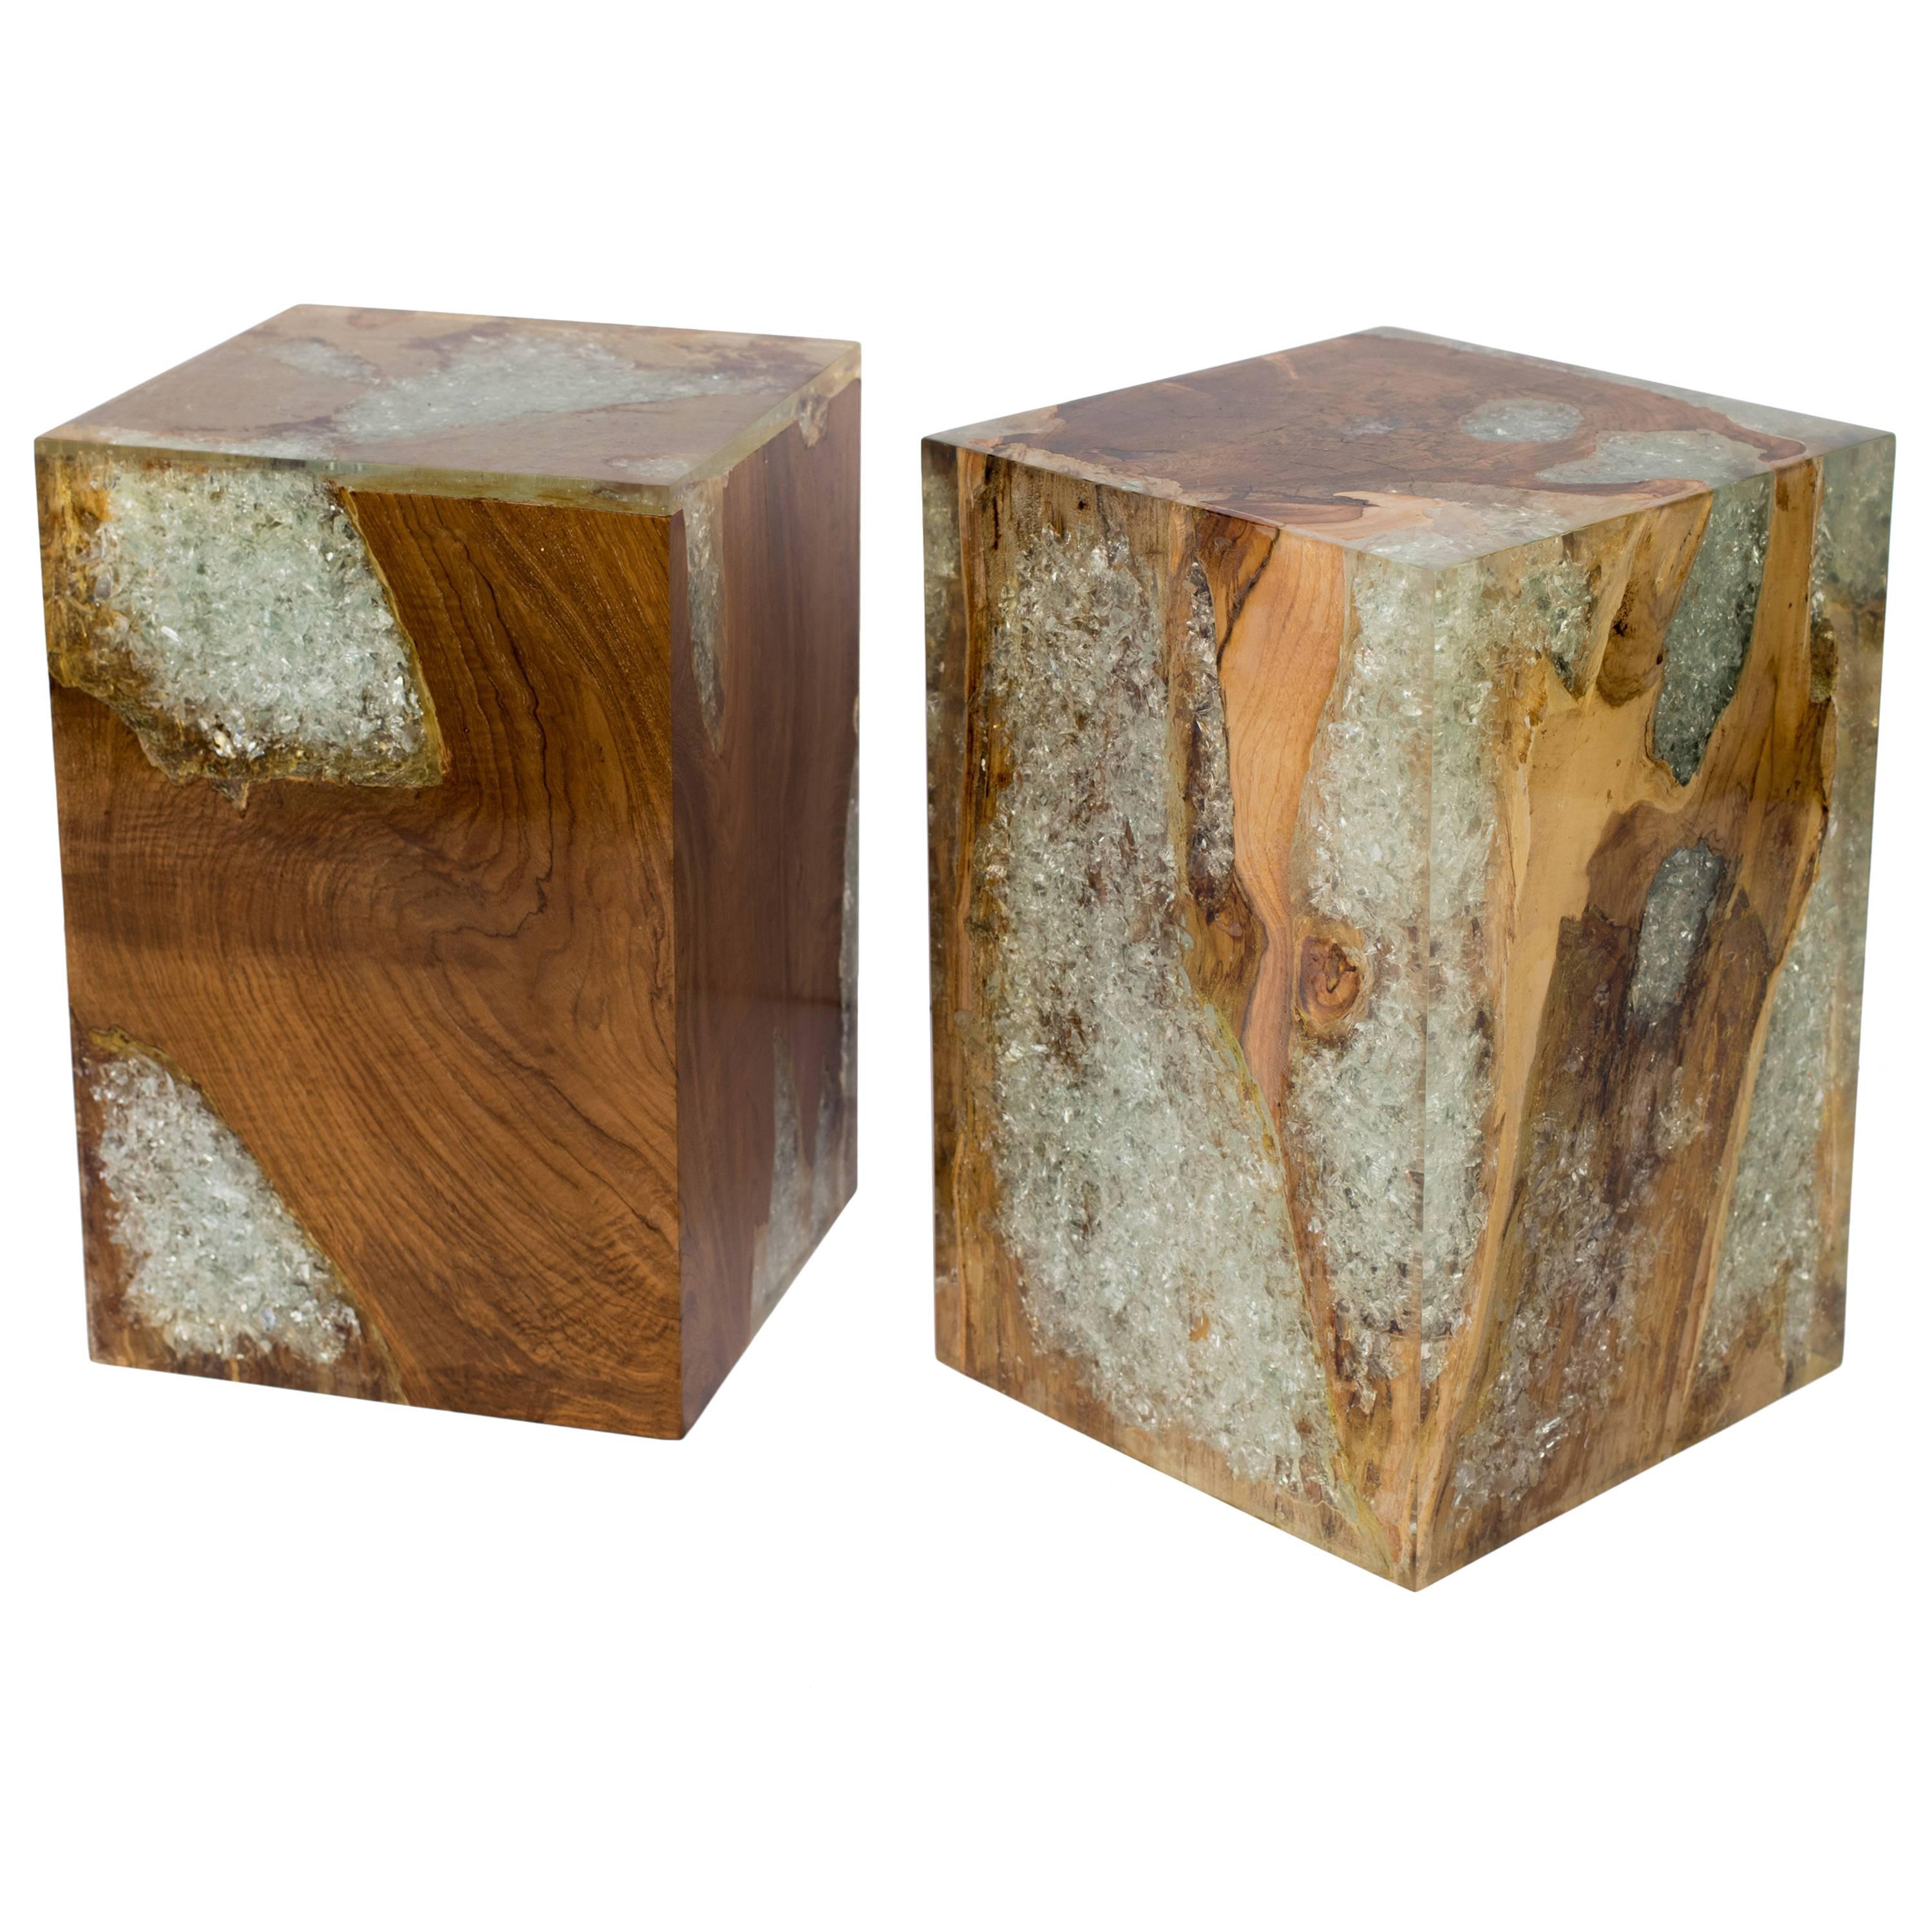 Organic Teak Wood and Cracked Resin Cube Tables